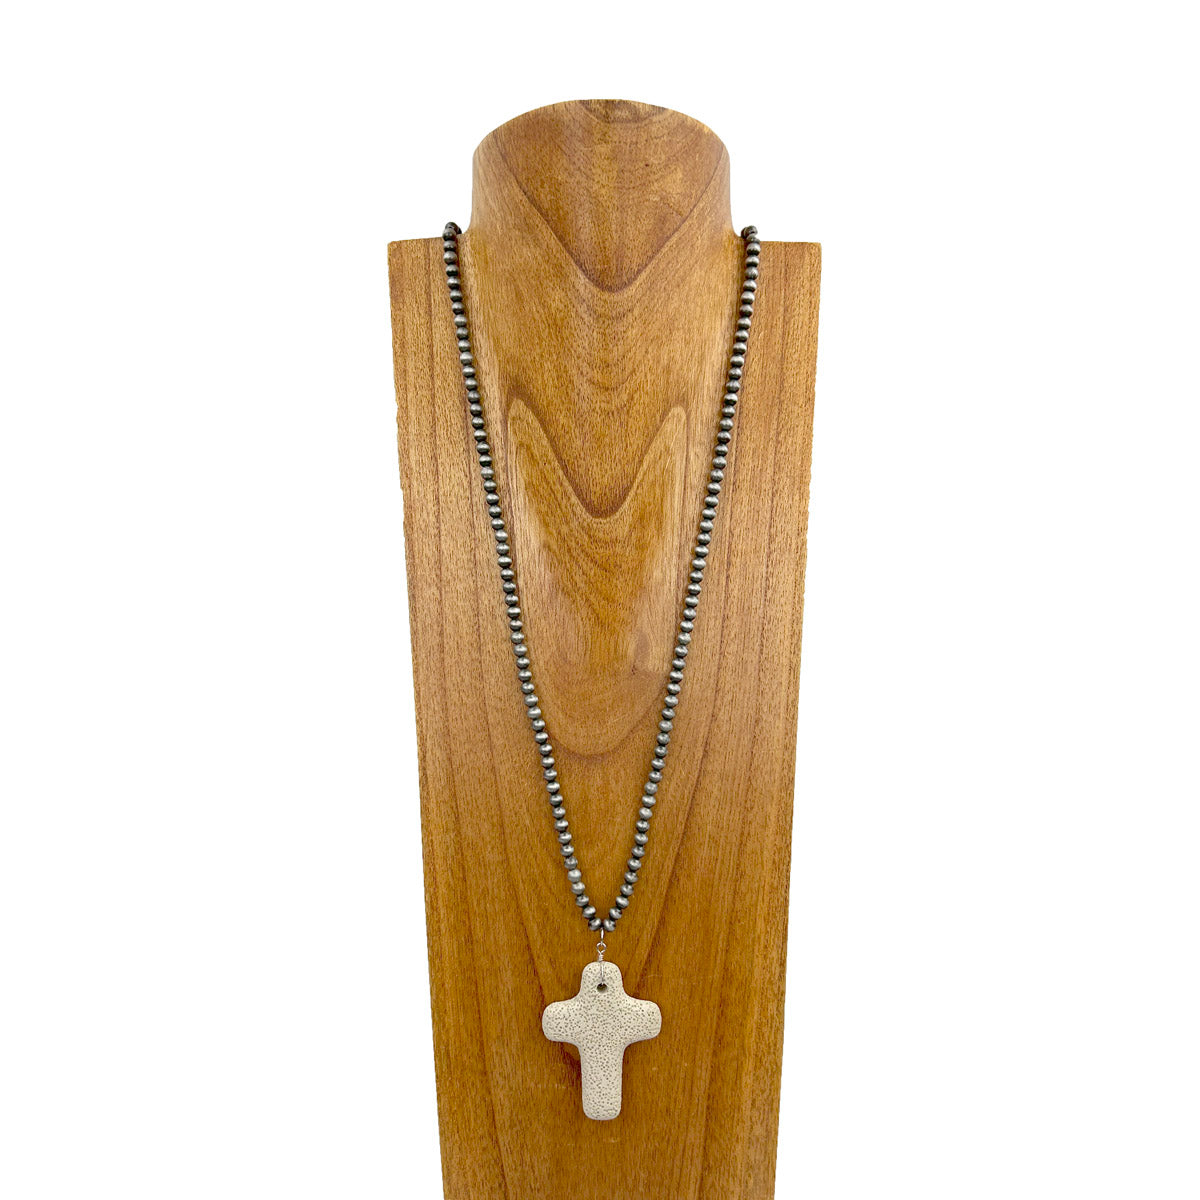 NKZ231112-34                36 inches silver Navajo pearl beads with pink lava stone cross pendent Necklace